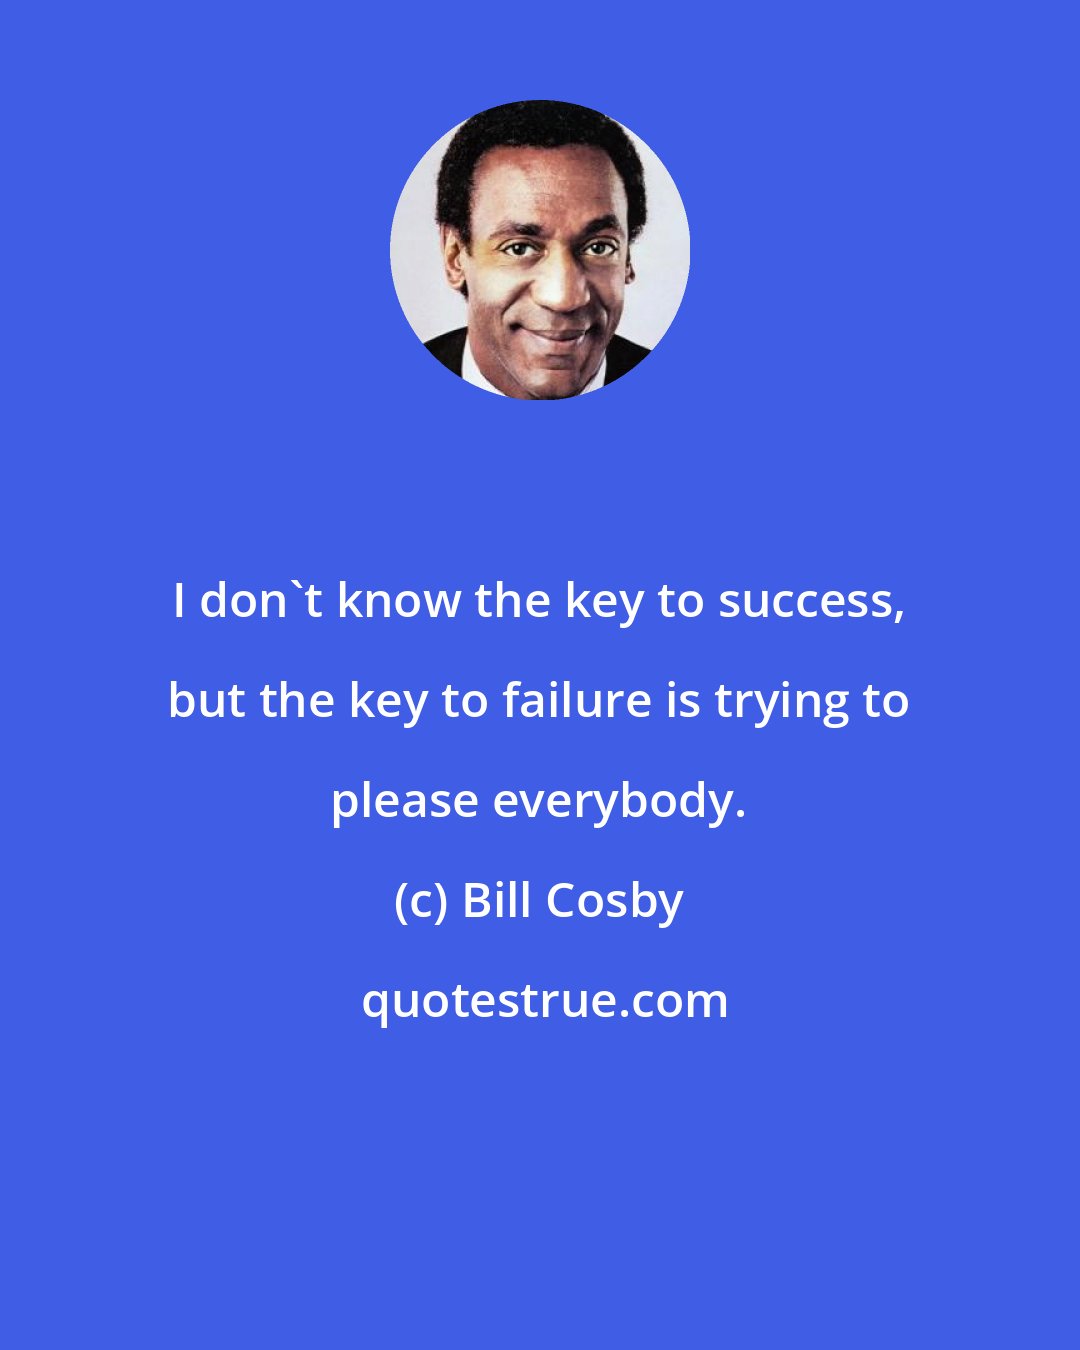 Bill Cosby: I don't know the key to success, but the key to failure is trying to please everybody.